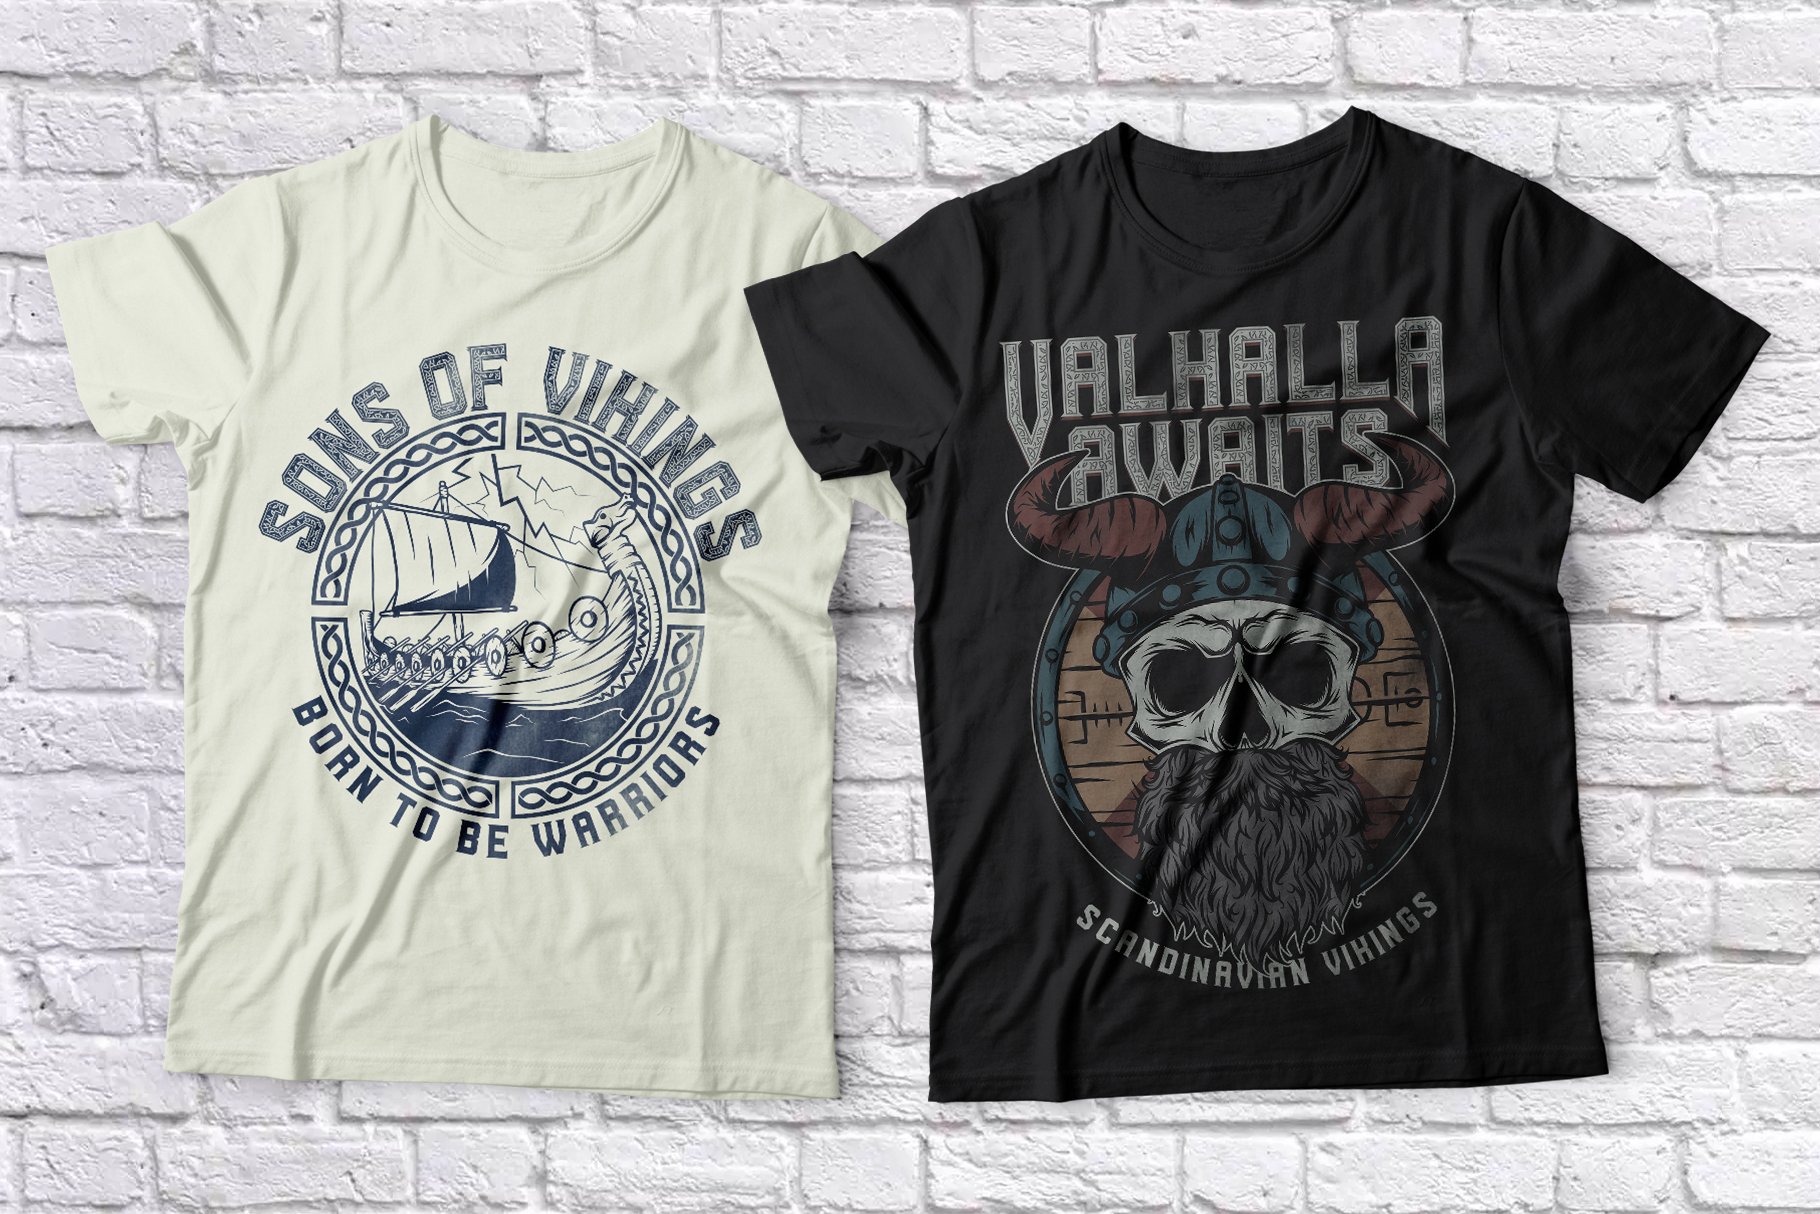 Cool viking graphics for t-shirts.